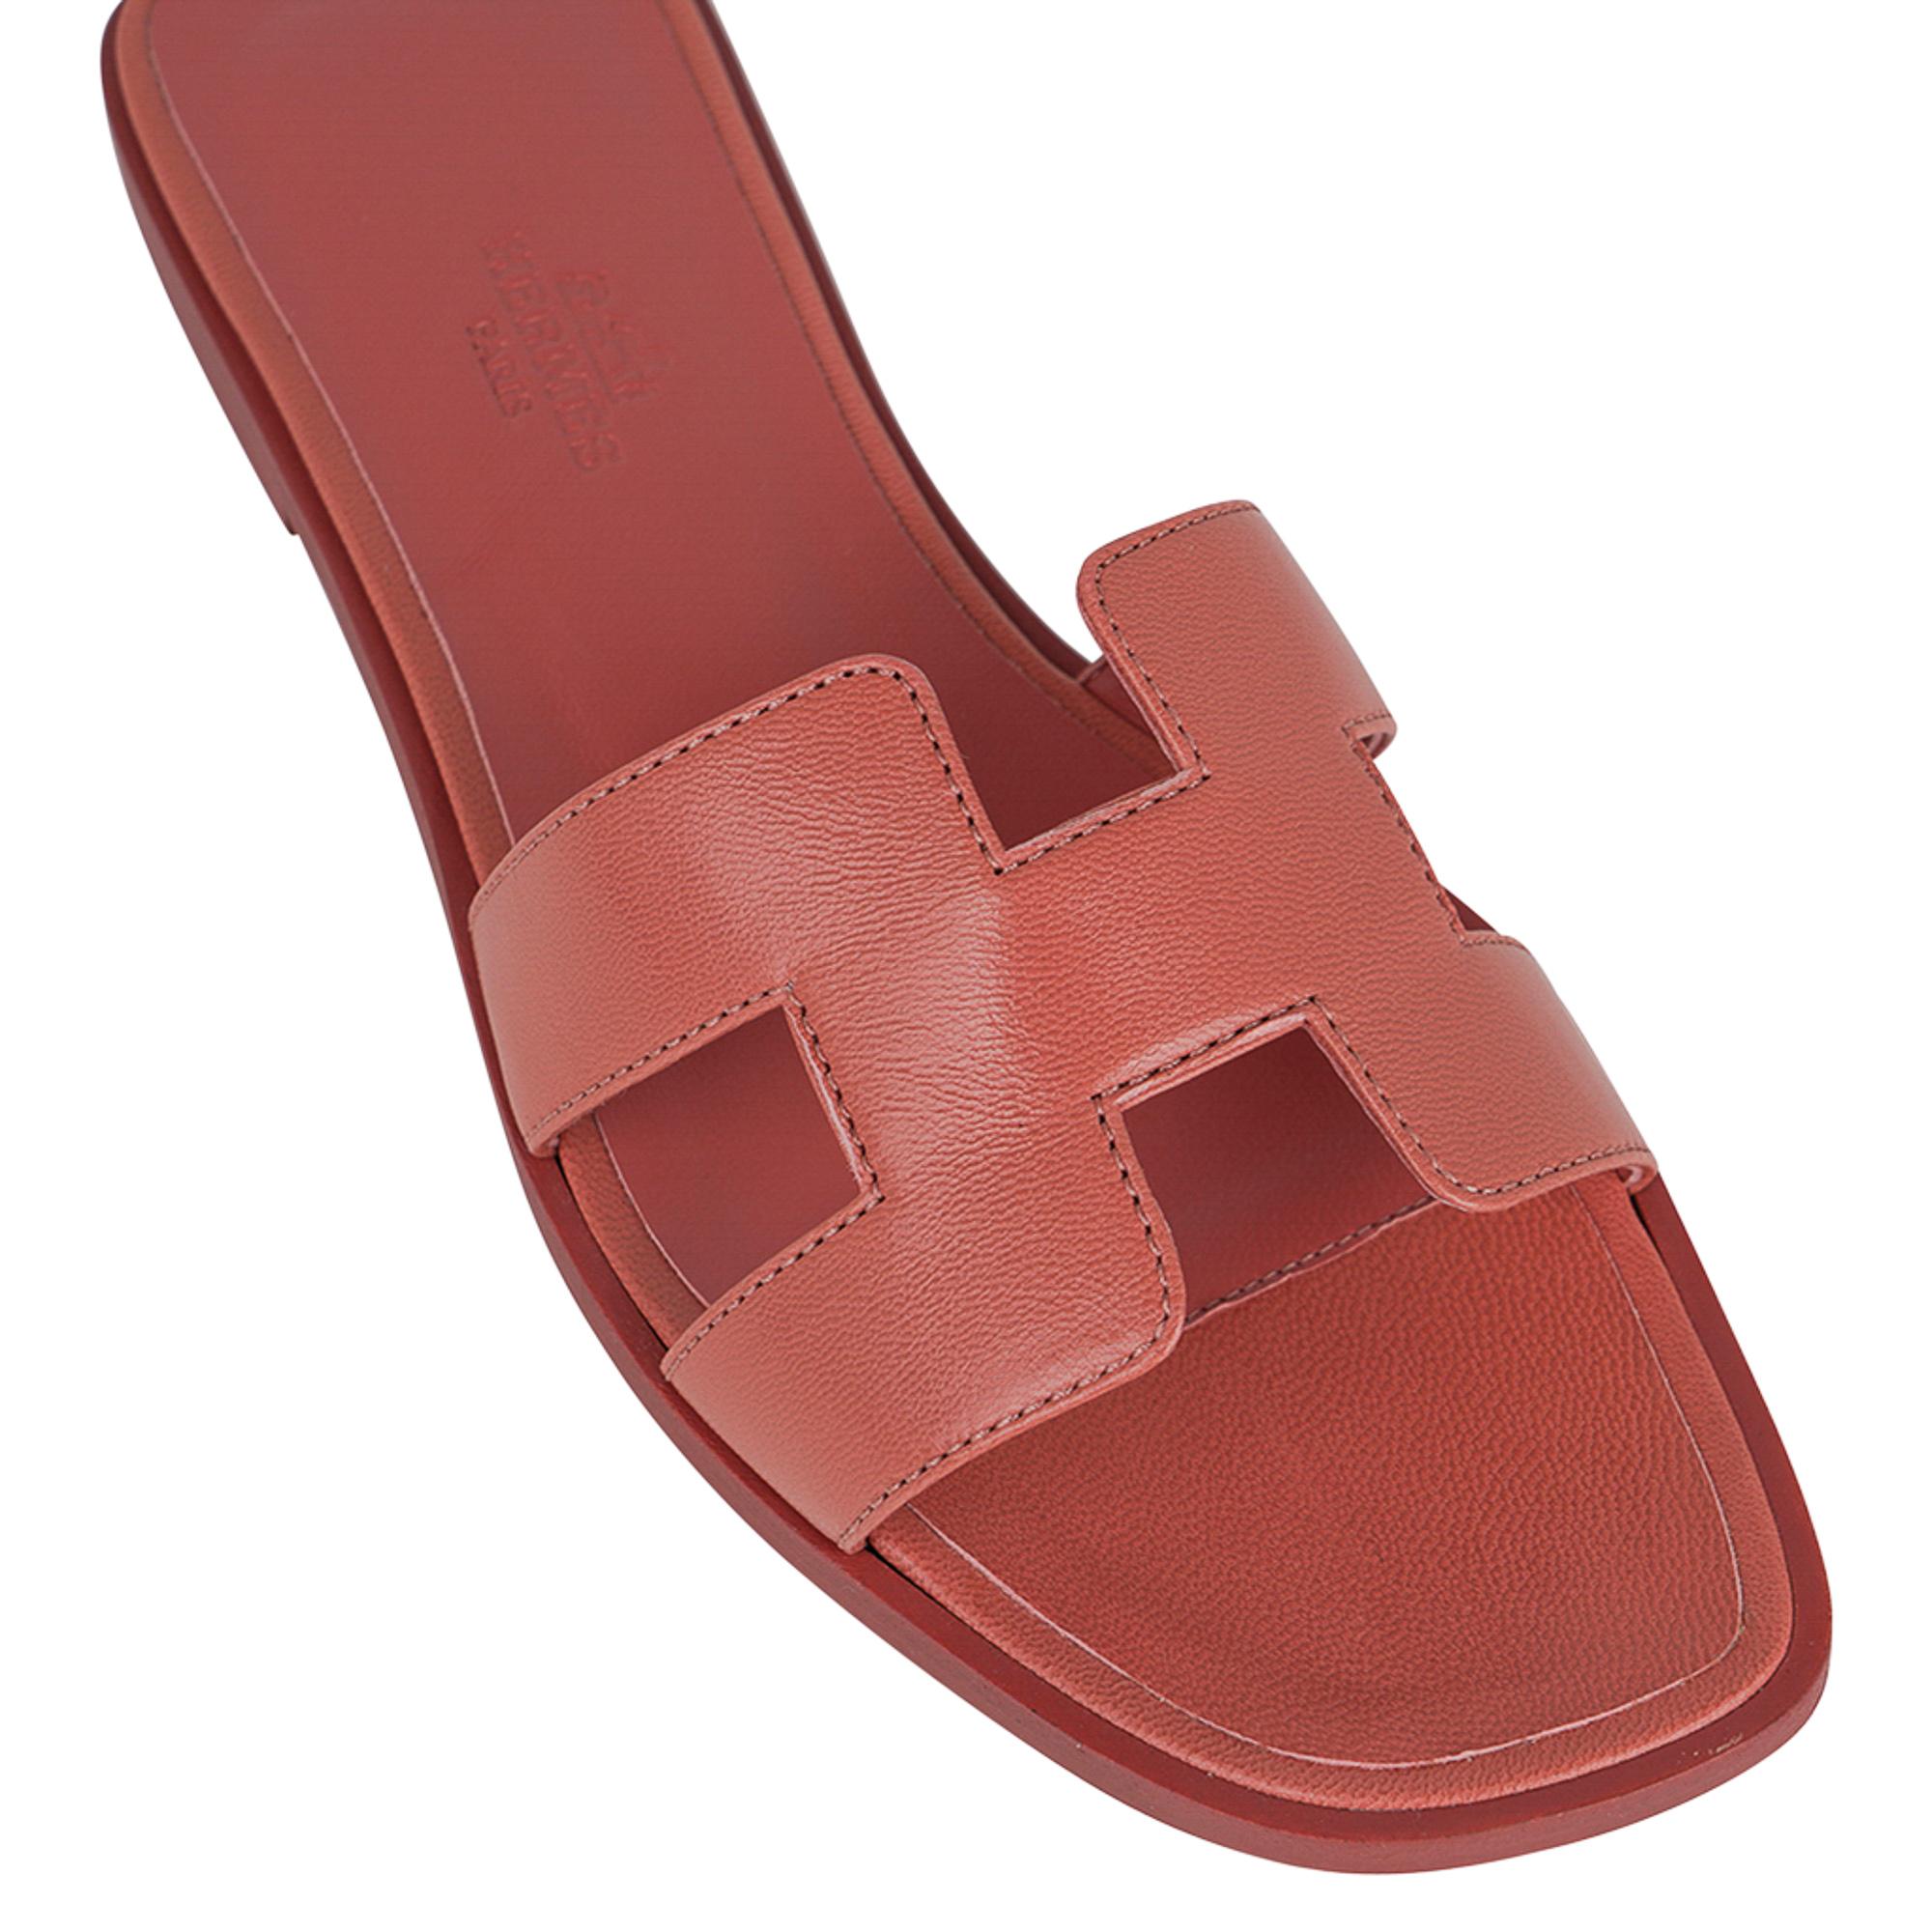 Mightychic offers a pair of Hermes Oran exquisite Rose Aube slides.
The iconic top stitched H cutout over the top of the foot.
Embossed calfskin in sole.
Wood heel with leather sole.
Comes with sleepers and and signature Hermes box.
NEW or NEVER